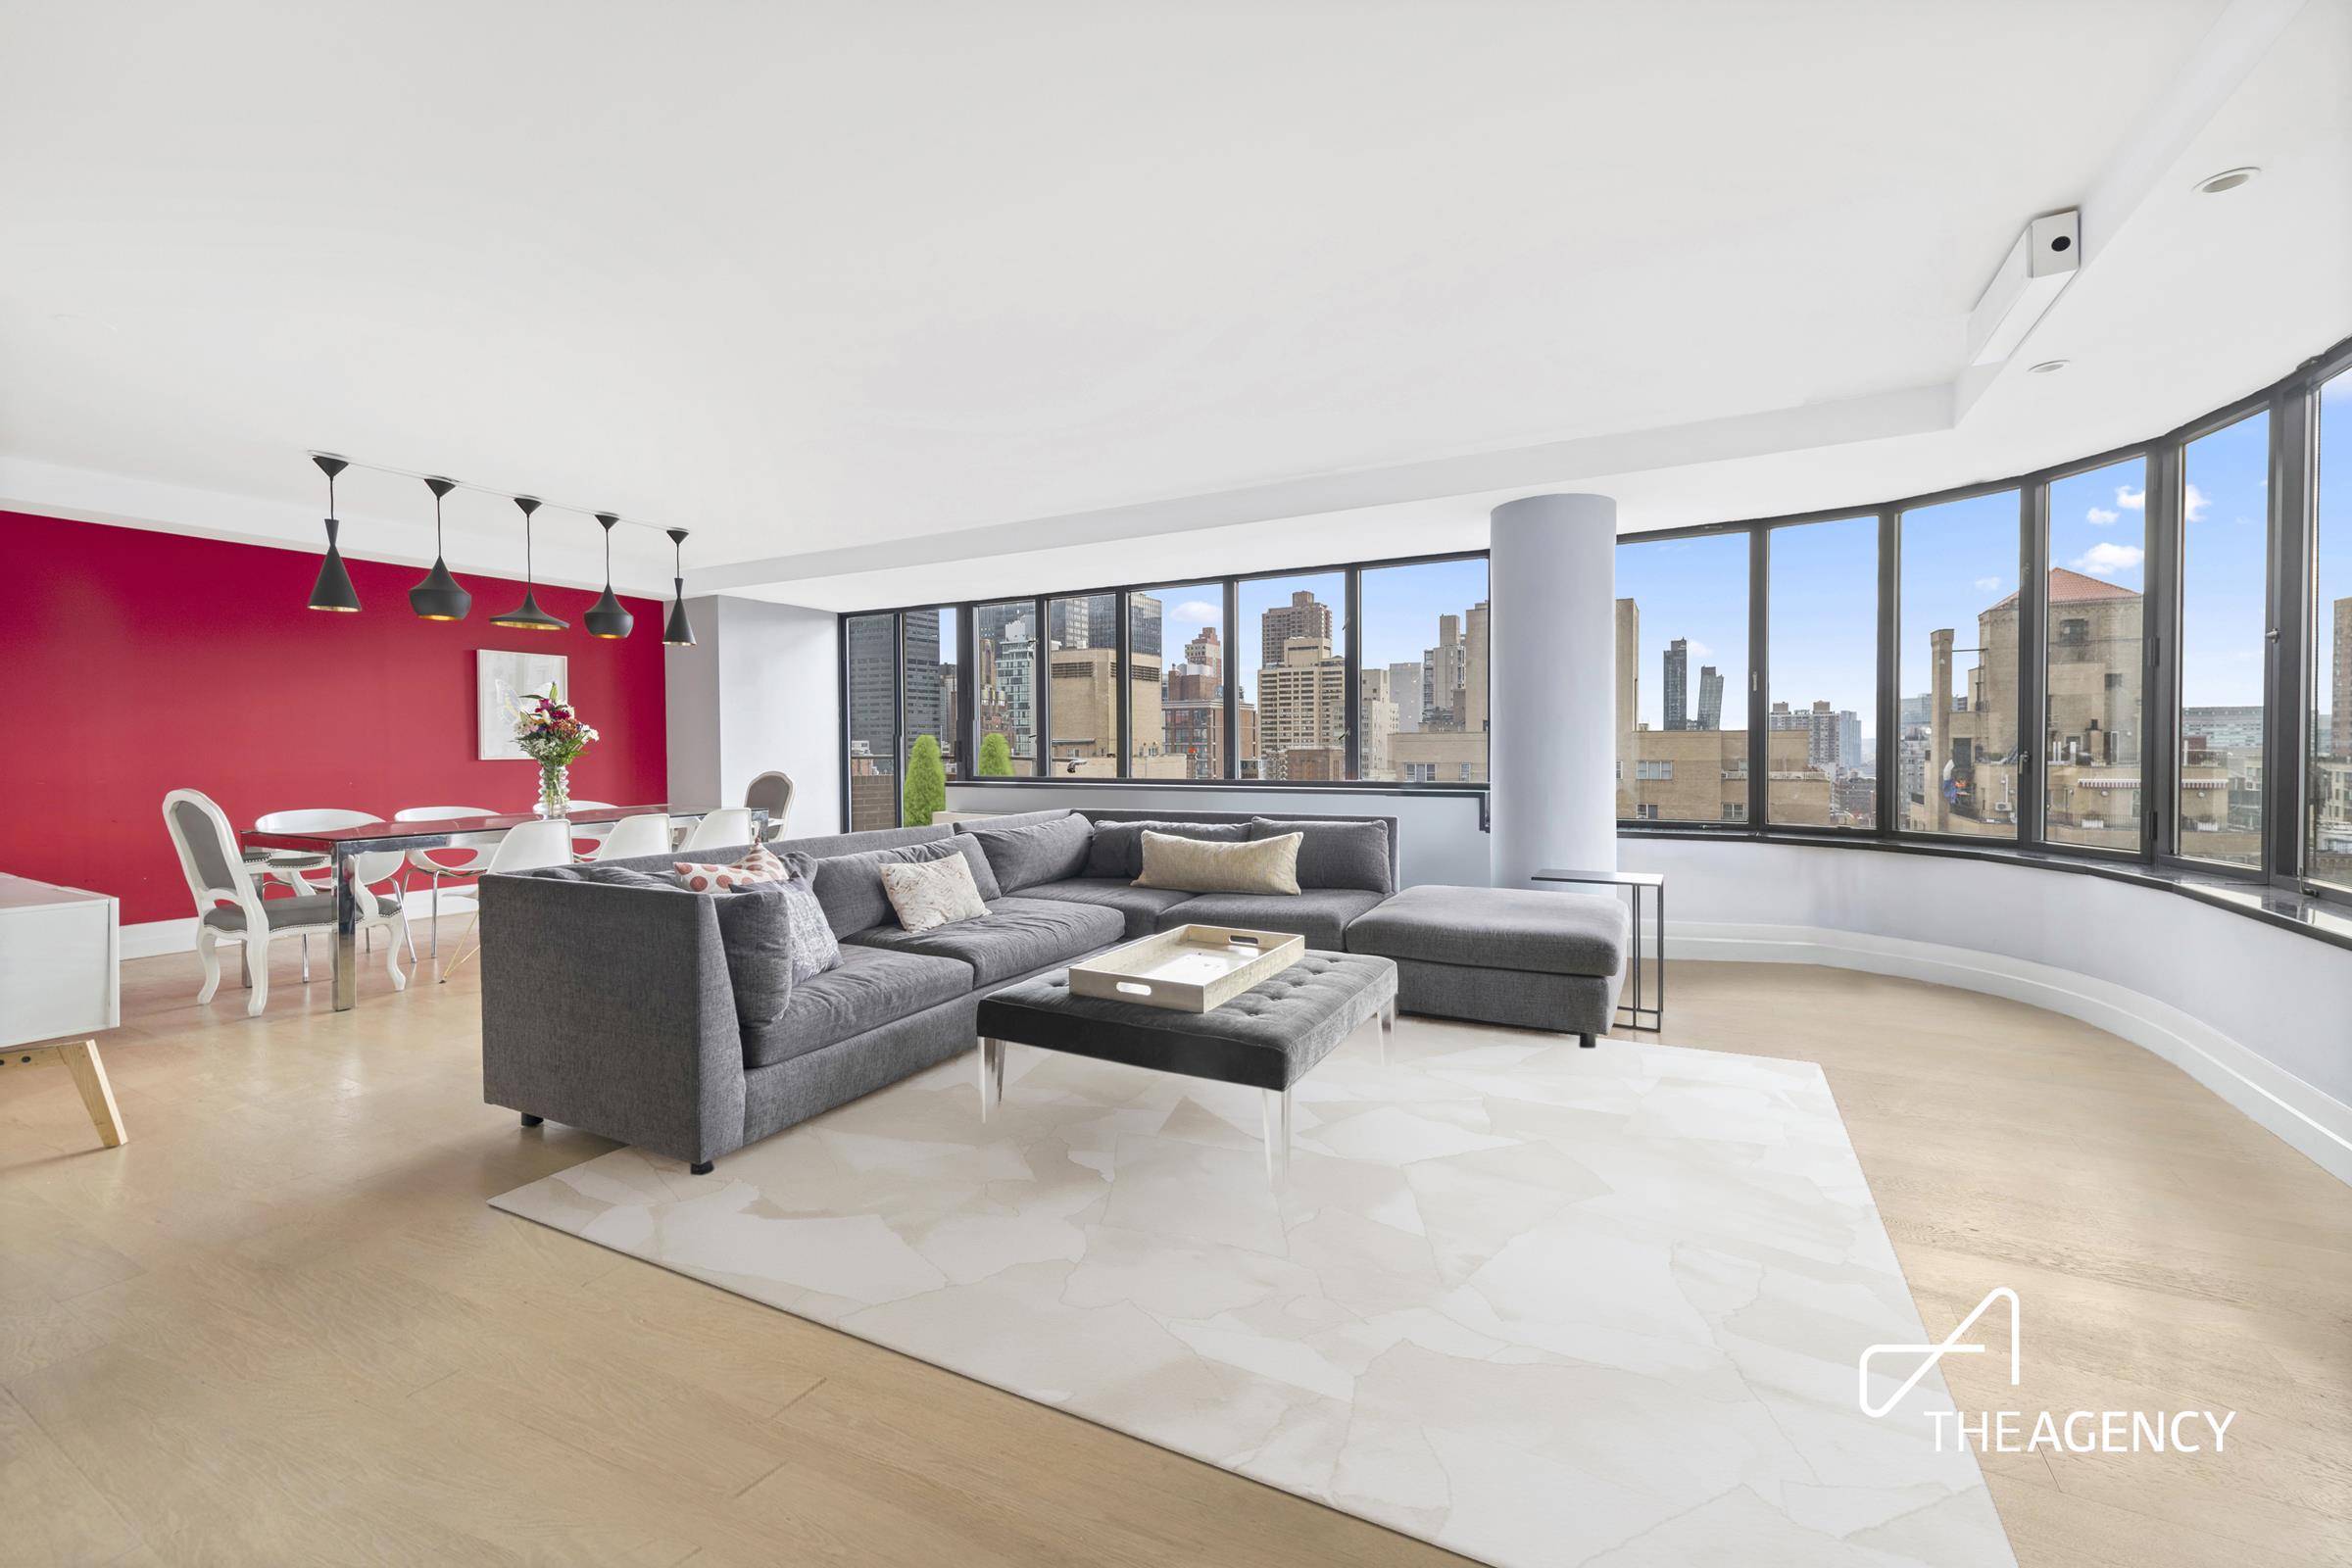 211 Madison Avenue 22-A, Murray Hill, Midtown East, NYC - 2 Bedrooms  
2.5 Bathrooms  
5 Rooms - 